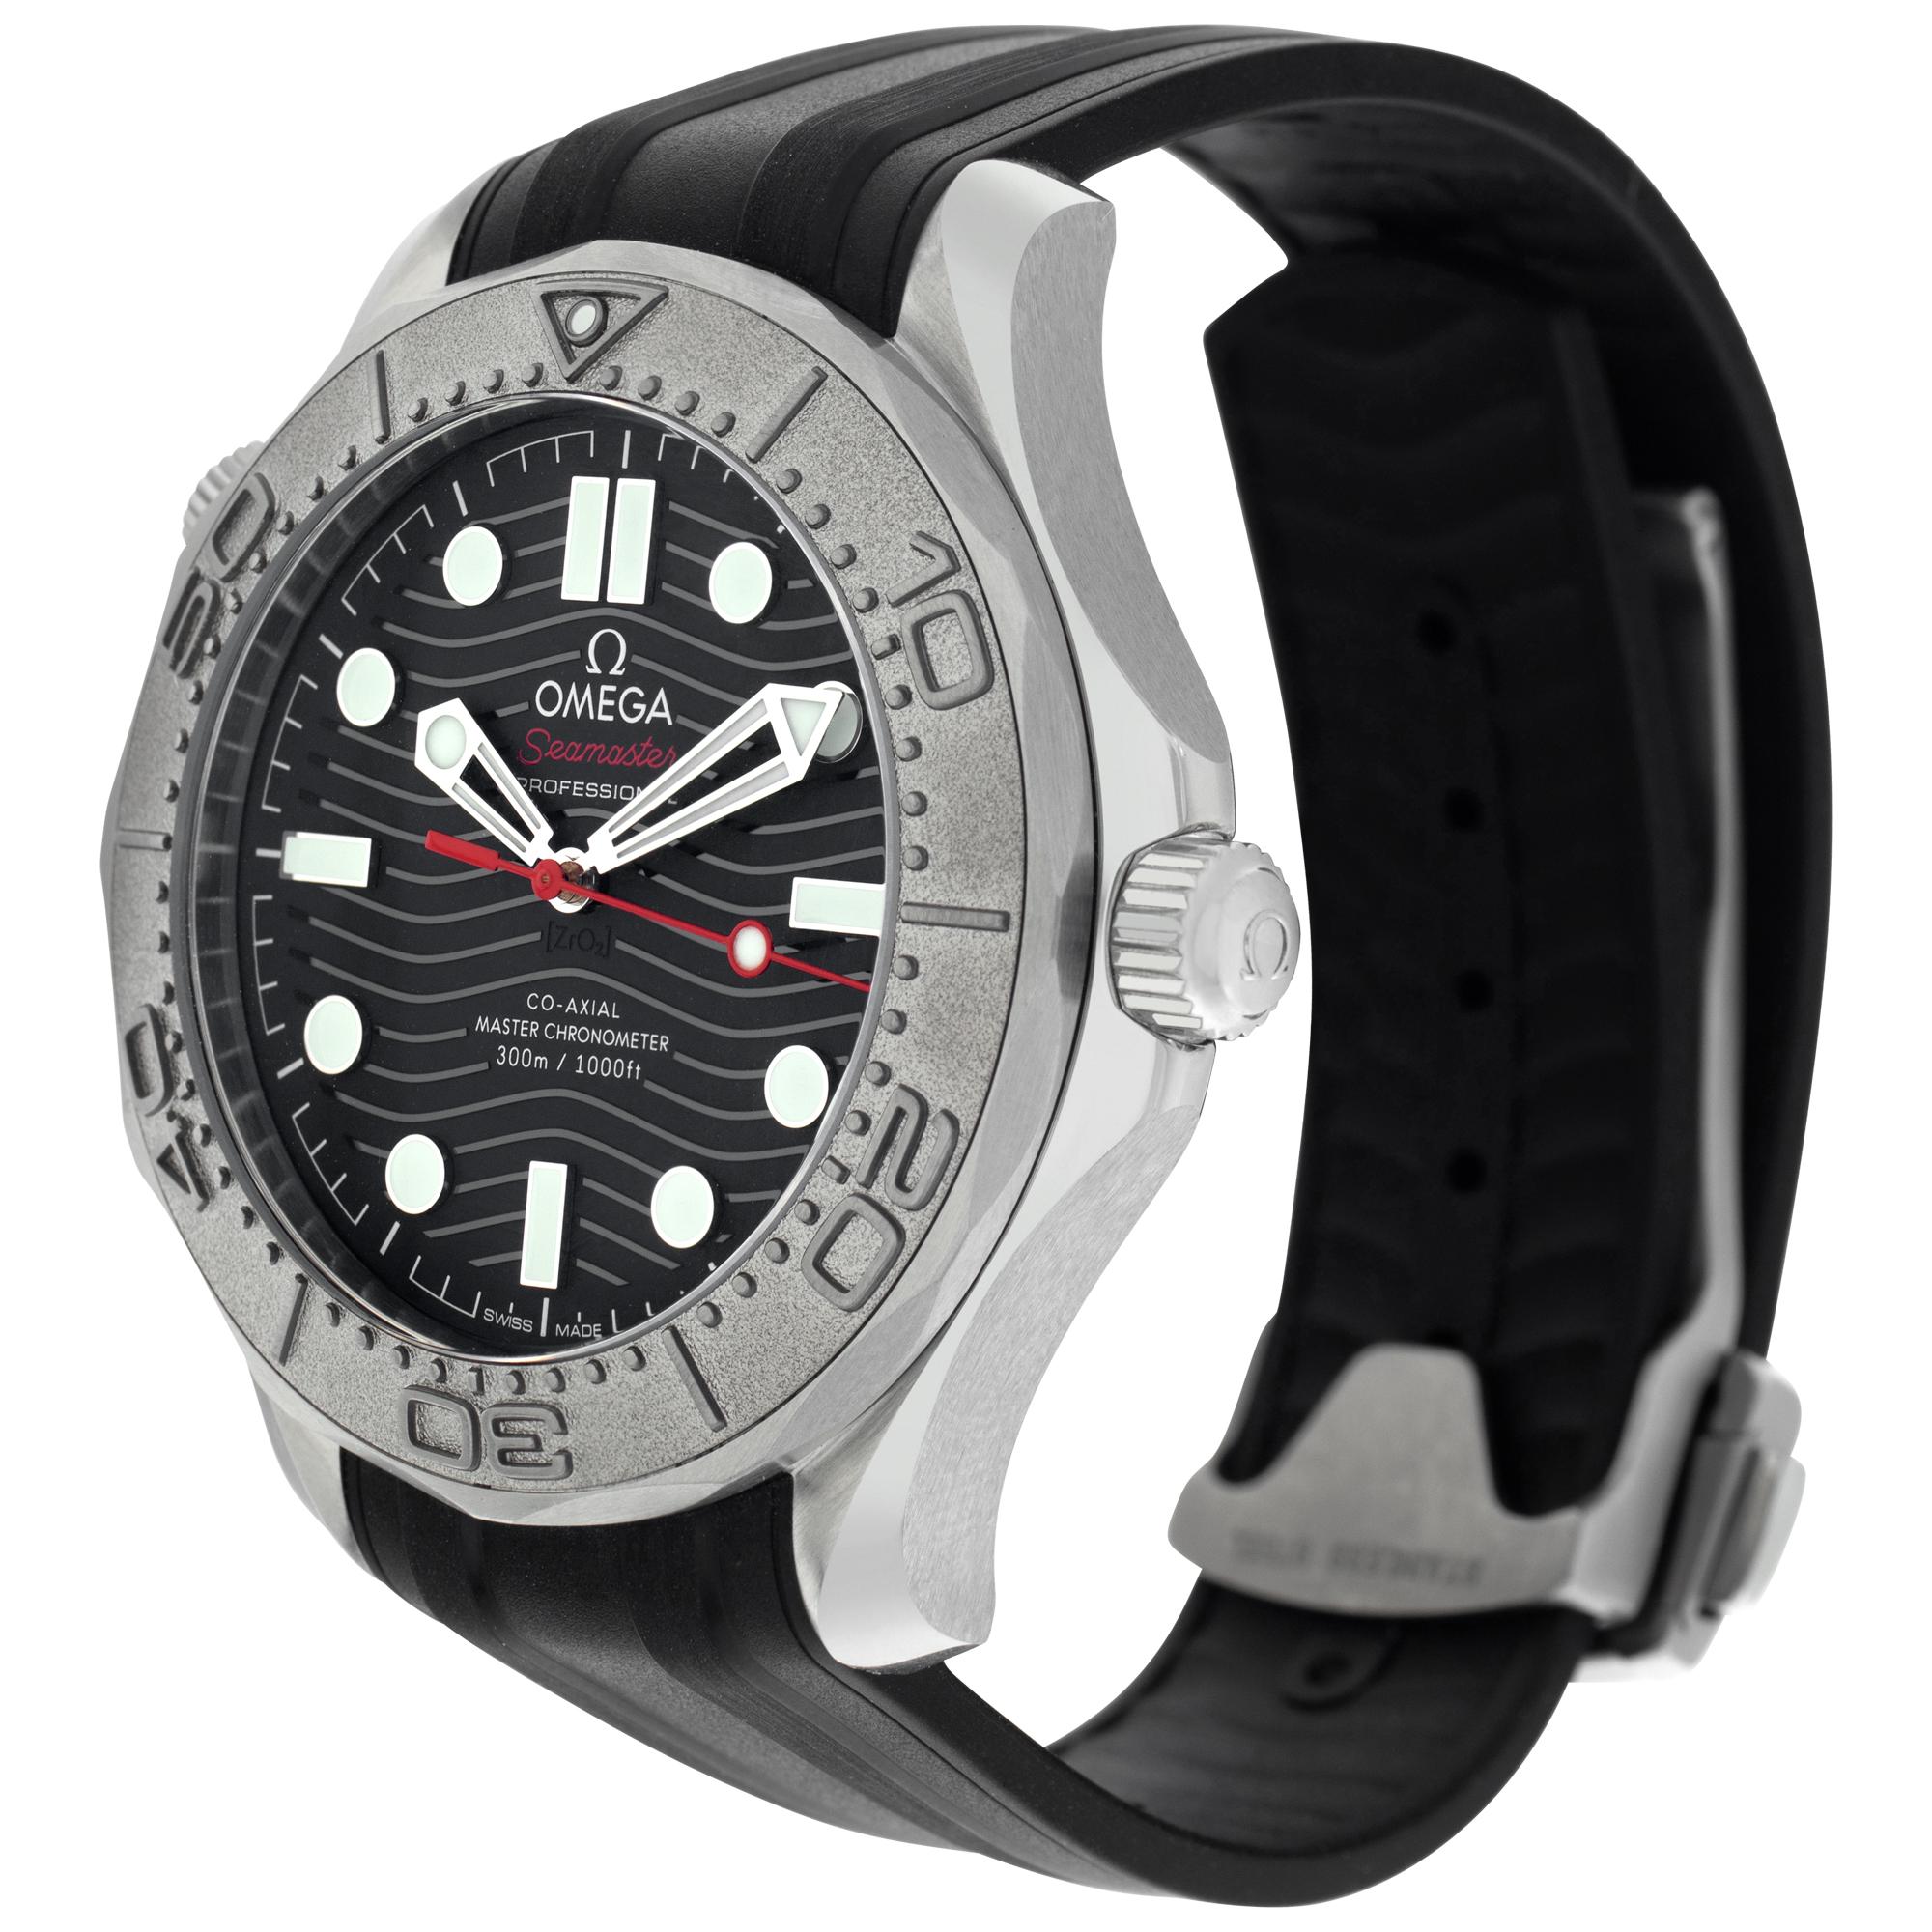 Omega Seamaster Diver 300m Nekton Edition in stainless steel with titanium bezel, black ceramic dial and a rubber strap. Auto w/ sweep seconds. 42 mm case size. Unused with box and papers dated May 2022. Ref 21032422001002. Fine Unused Omega Watch.